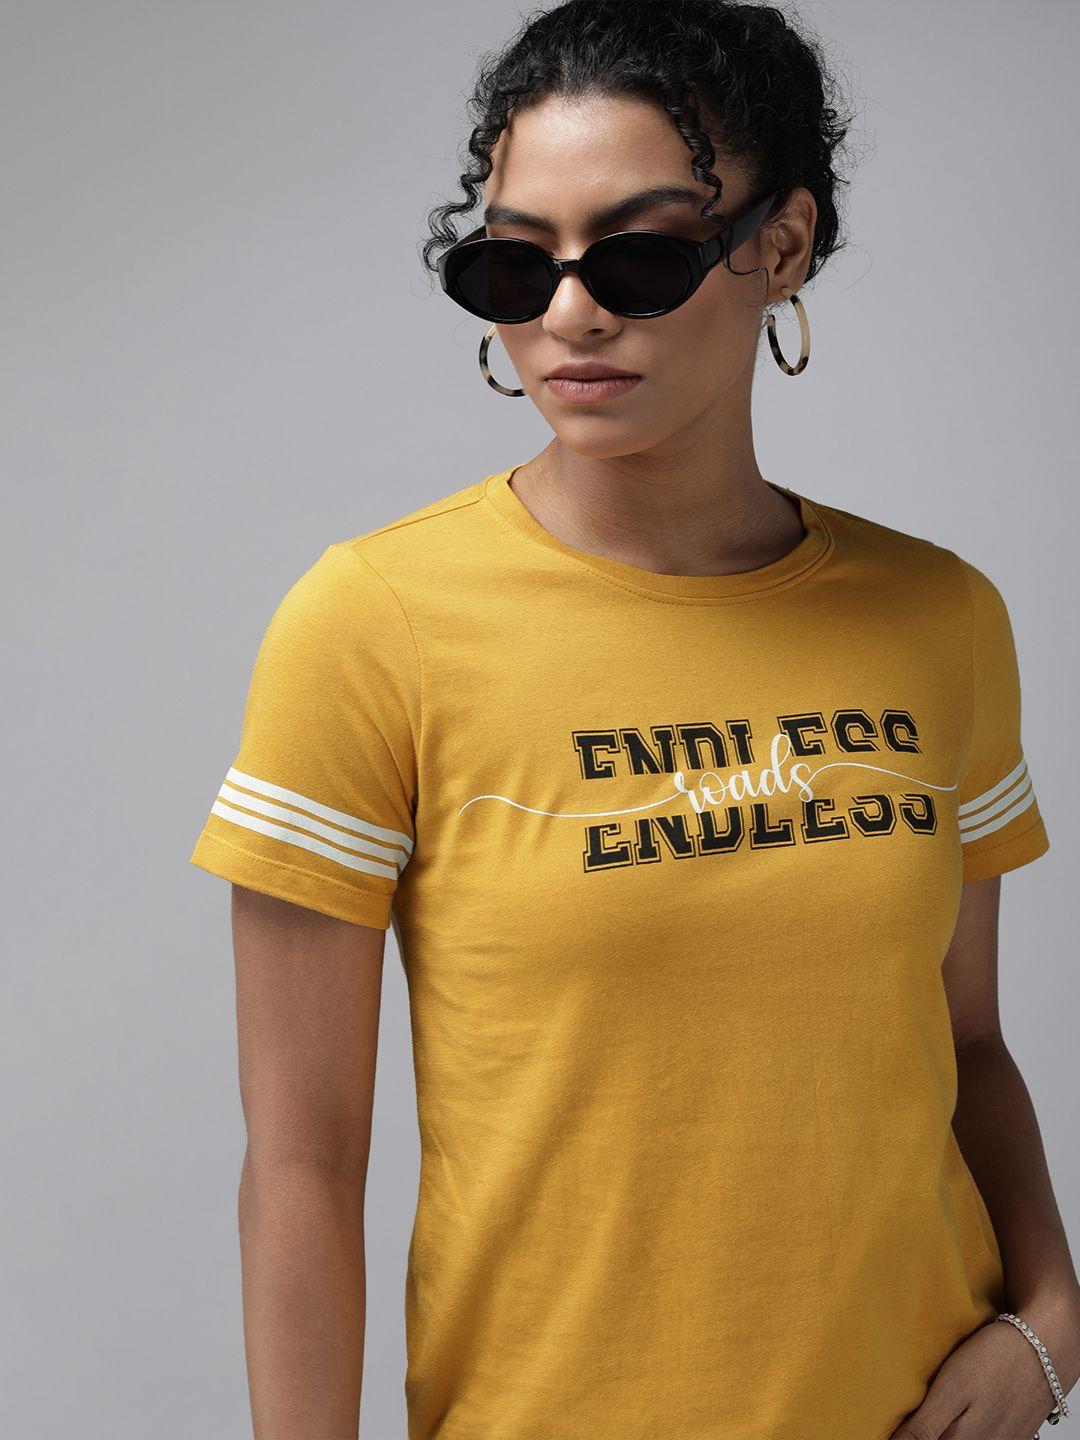 the roadster lifestyle co women mustard yellow typography print round neck pure cotton t-shirt with stripes